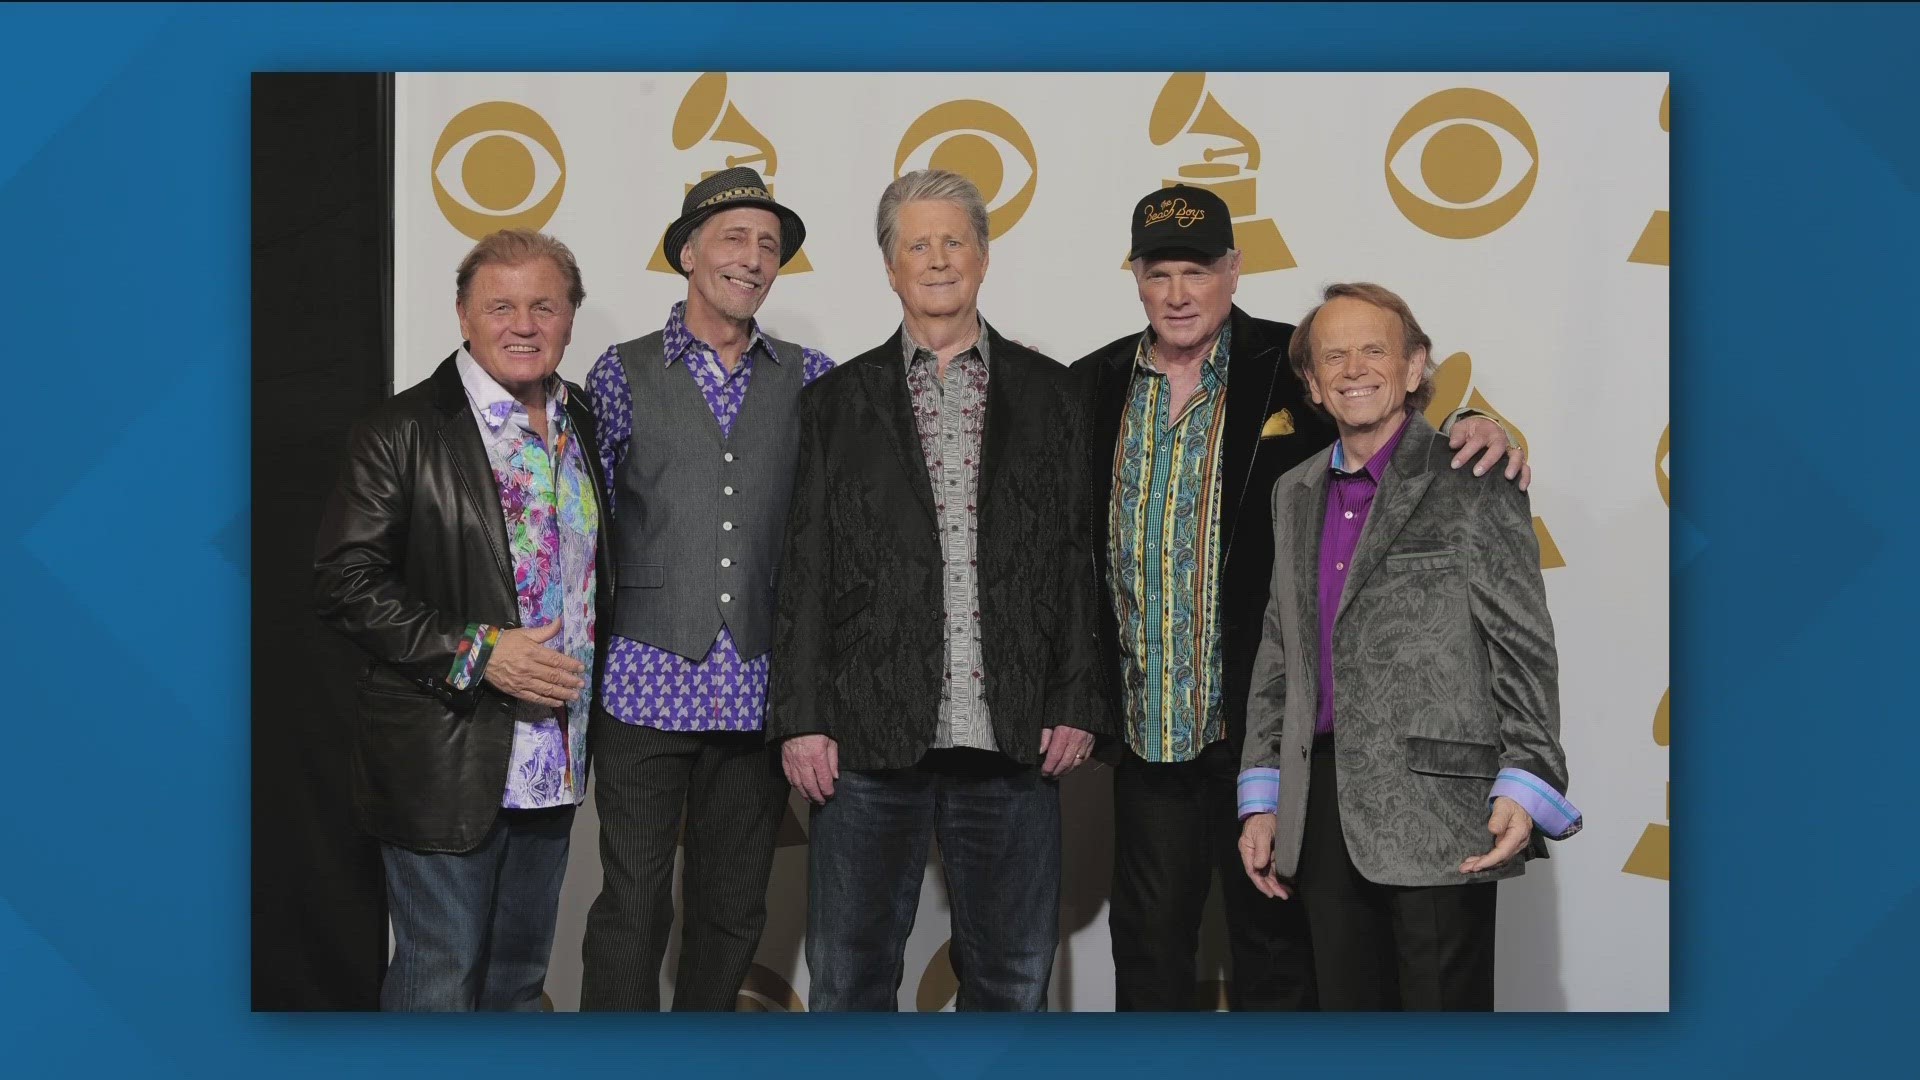 With over 50 years of 'Fun, Fun, Fun,' The Beach Boys are sure to be 'Surfin' up some good tunes this summer.